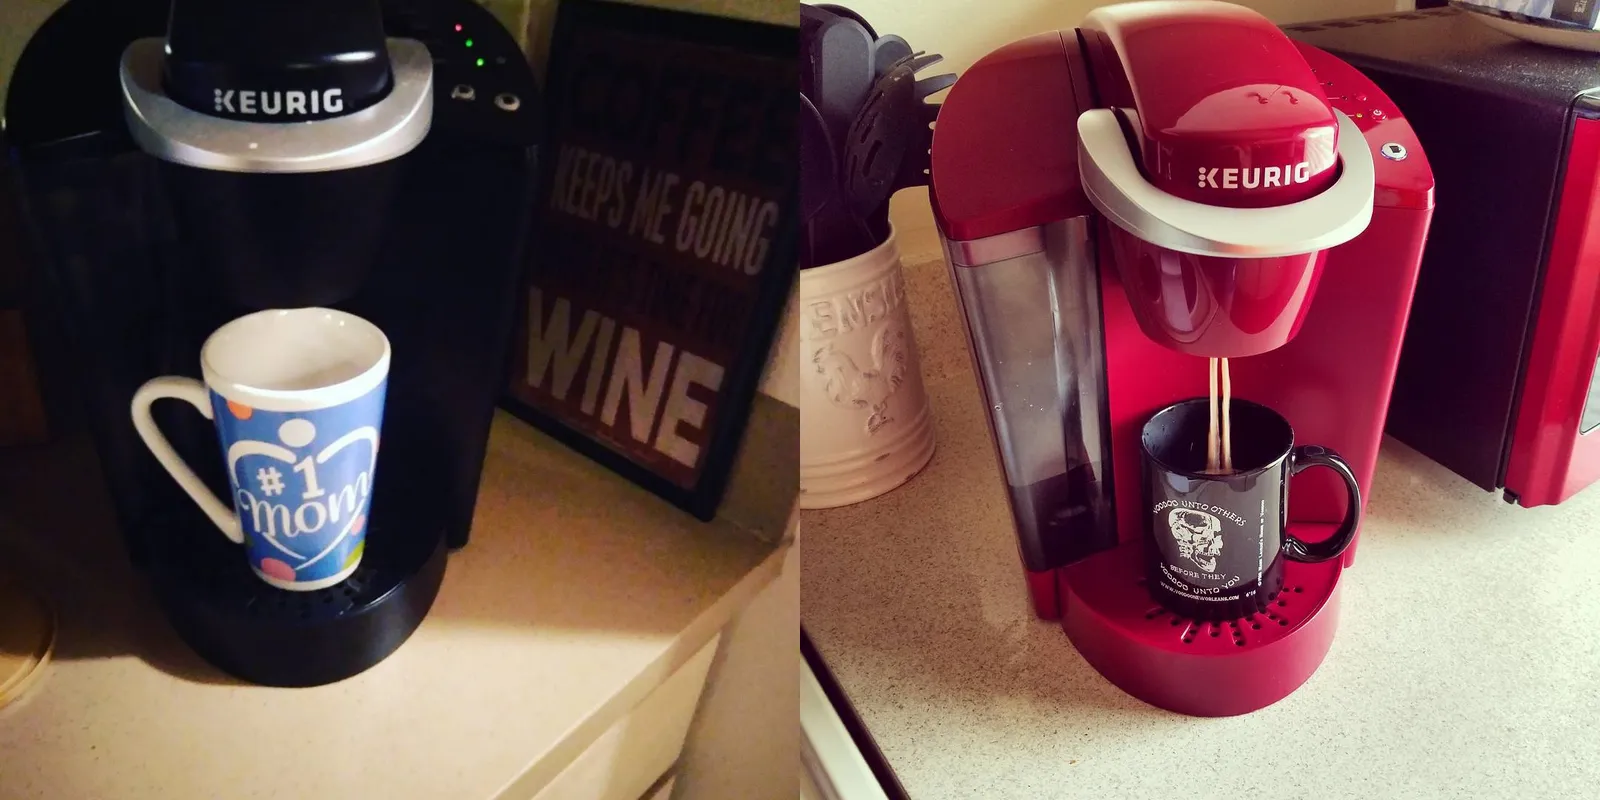 How To Turn Off Descale Light On Keurig